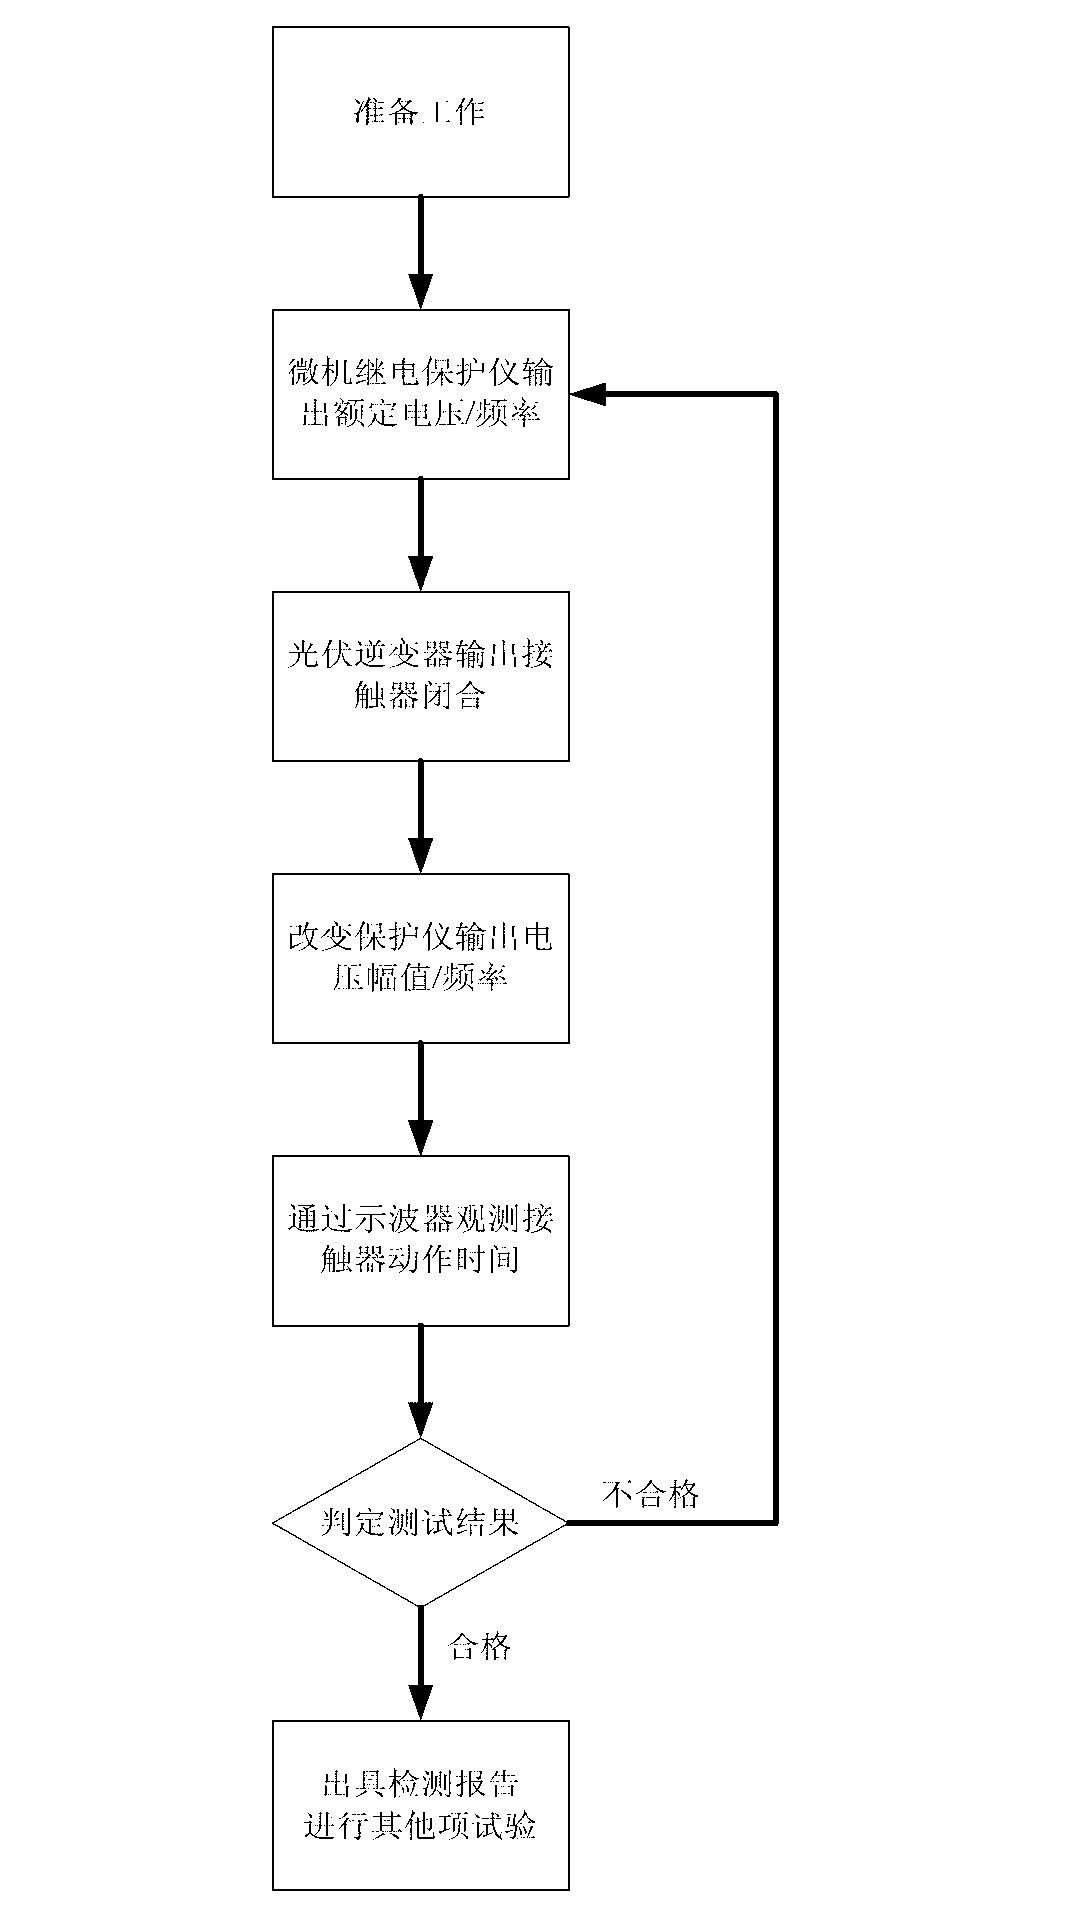 Grid-connection adaptability testing system and method for photovoltaic power stations